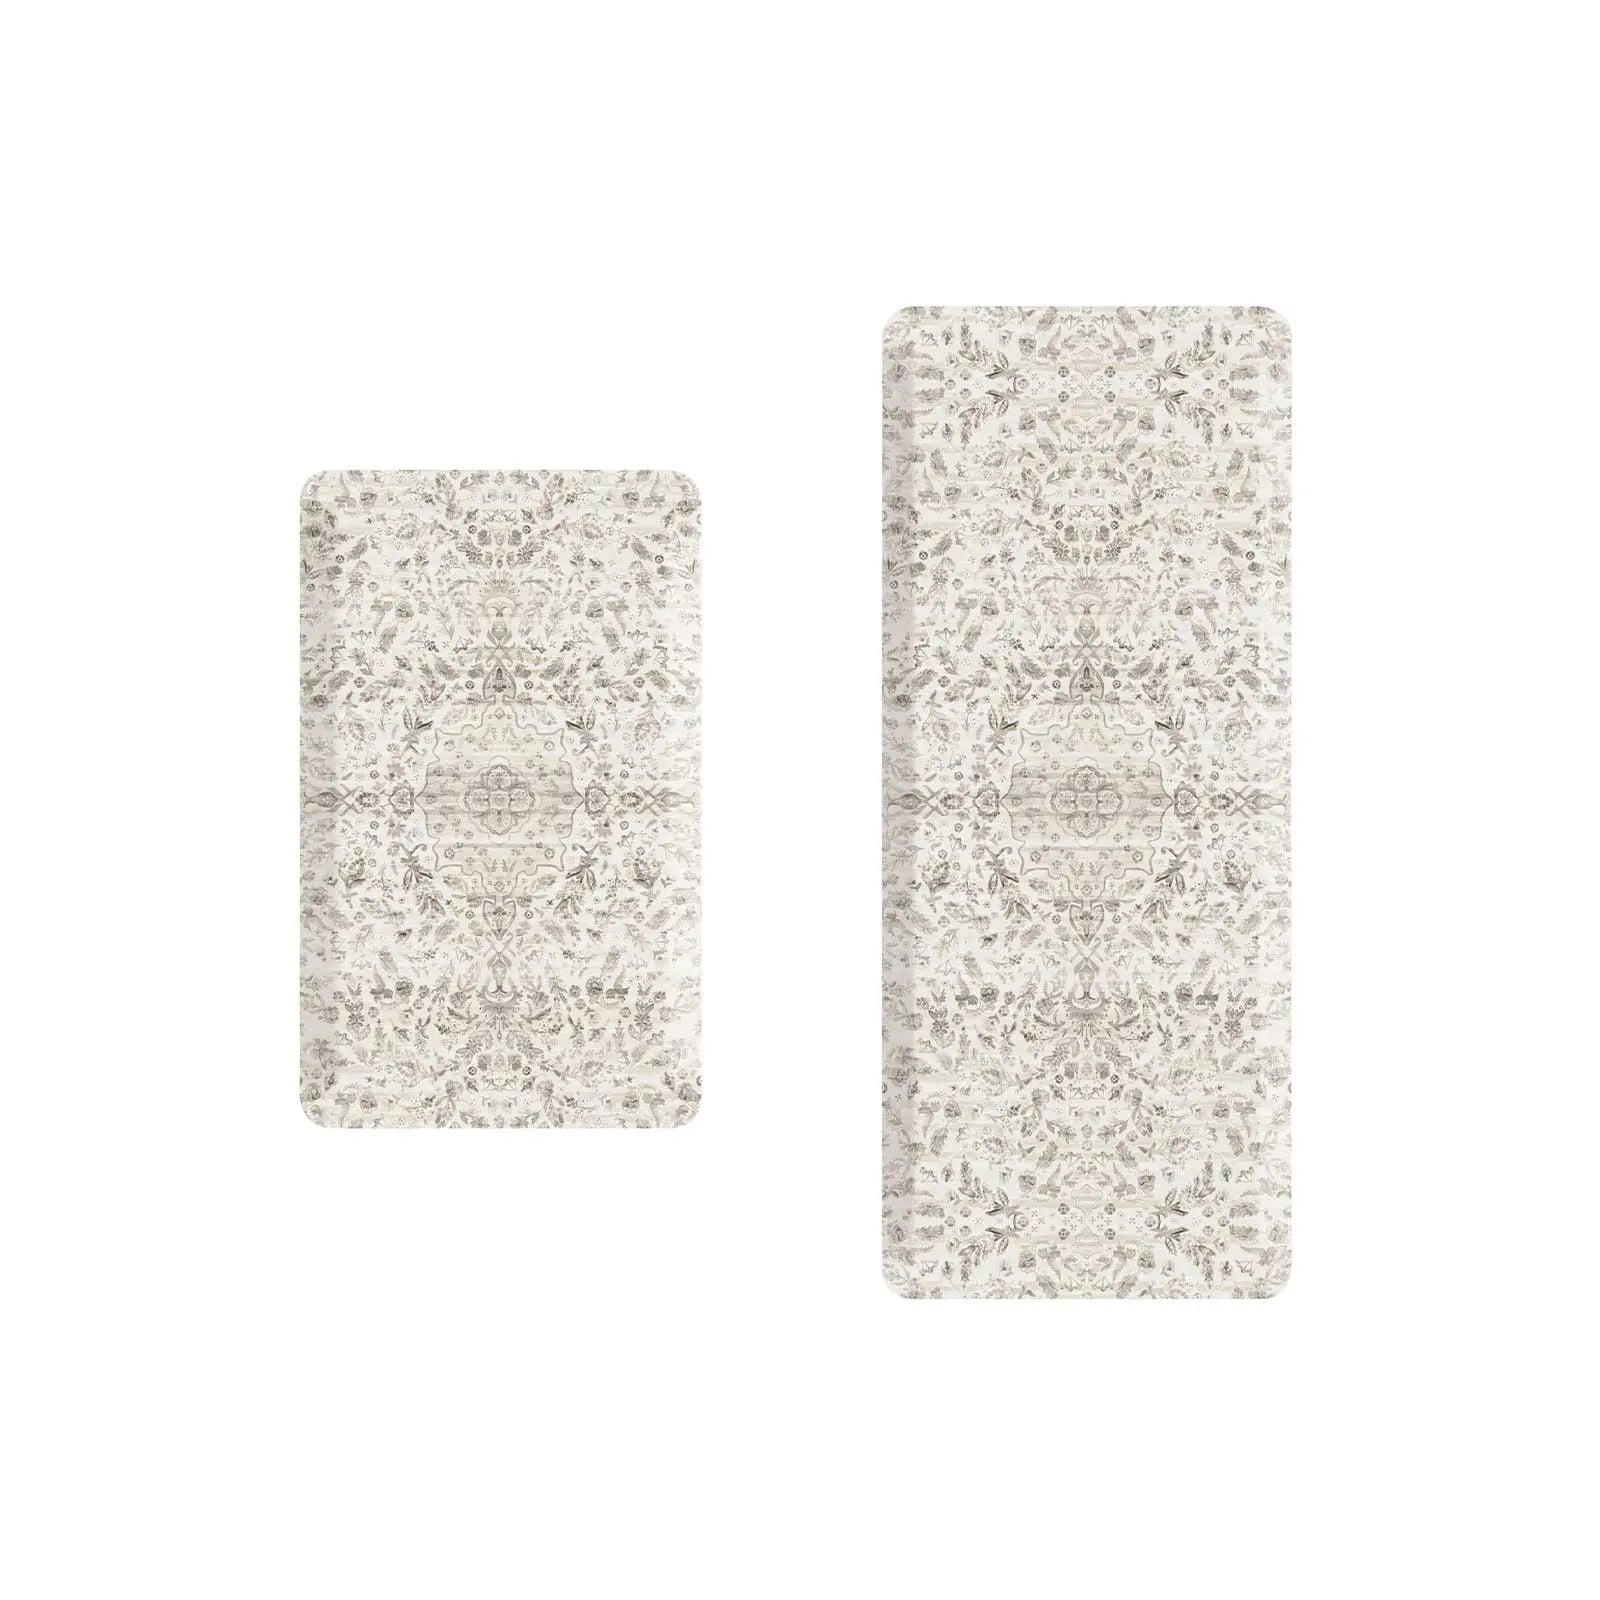 Emile latte beige and gray floral boho kitchen mat shown in sizes 22x36 and 22x54